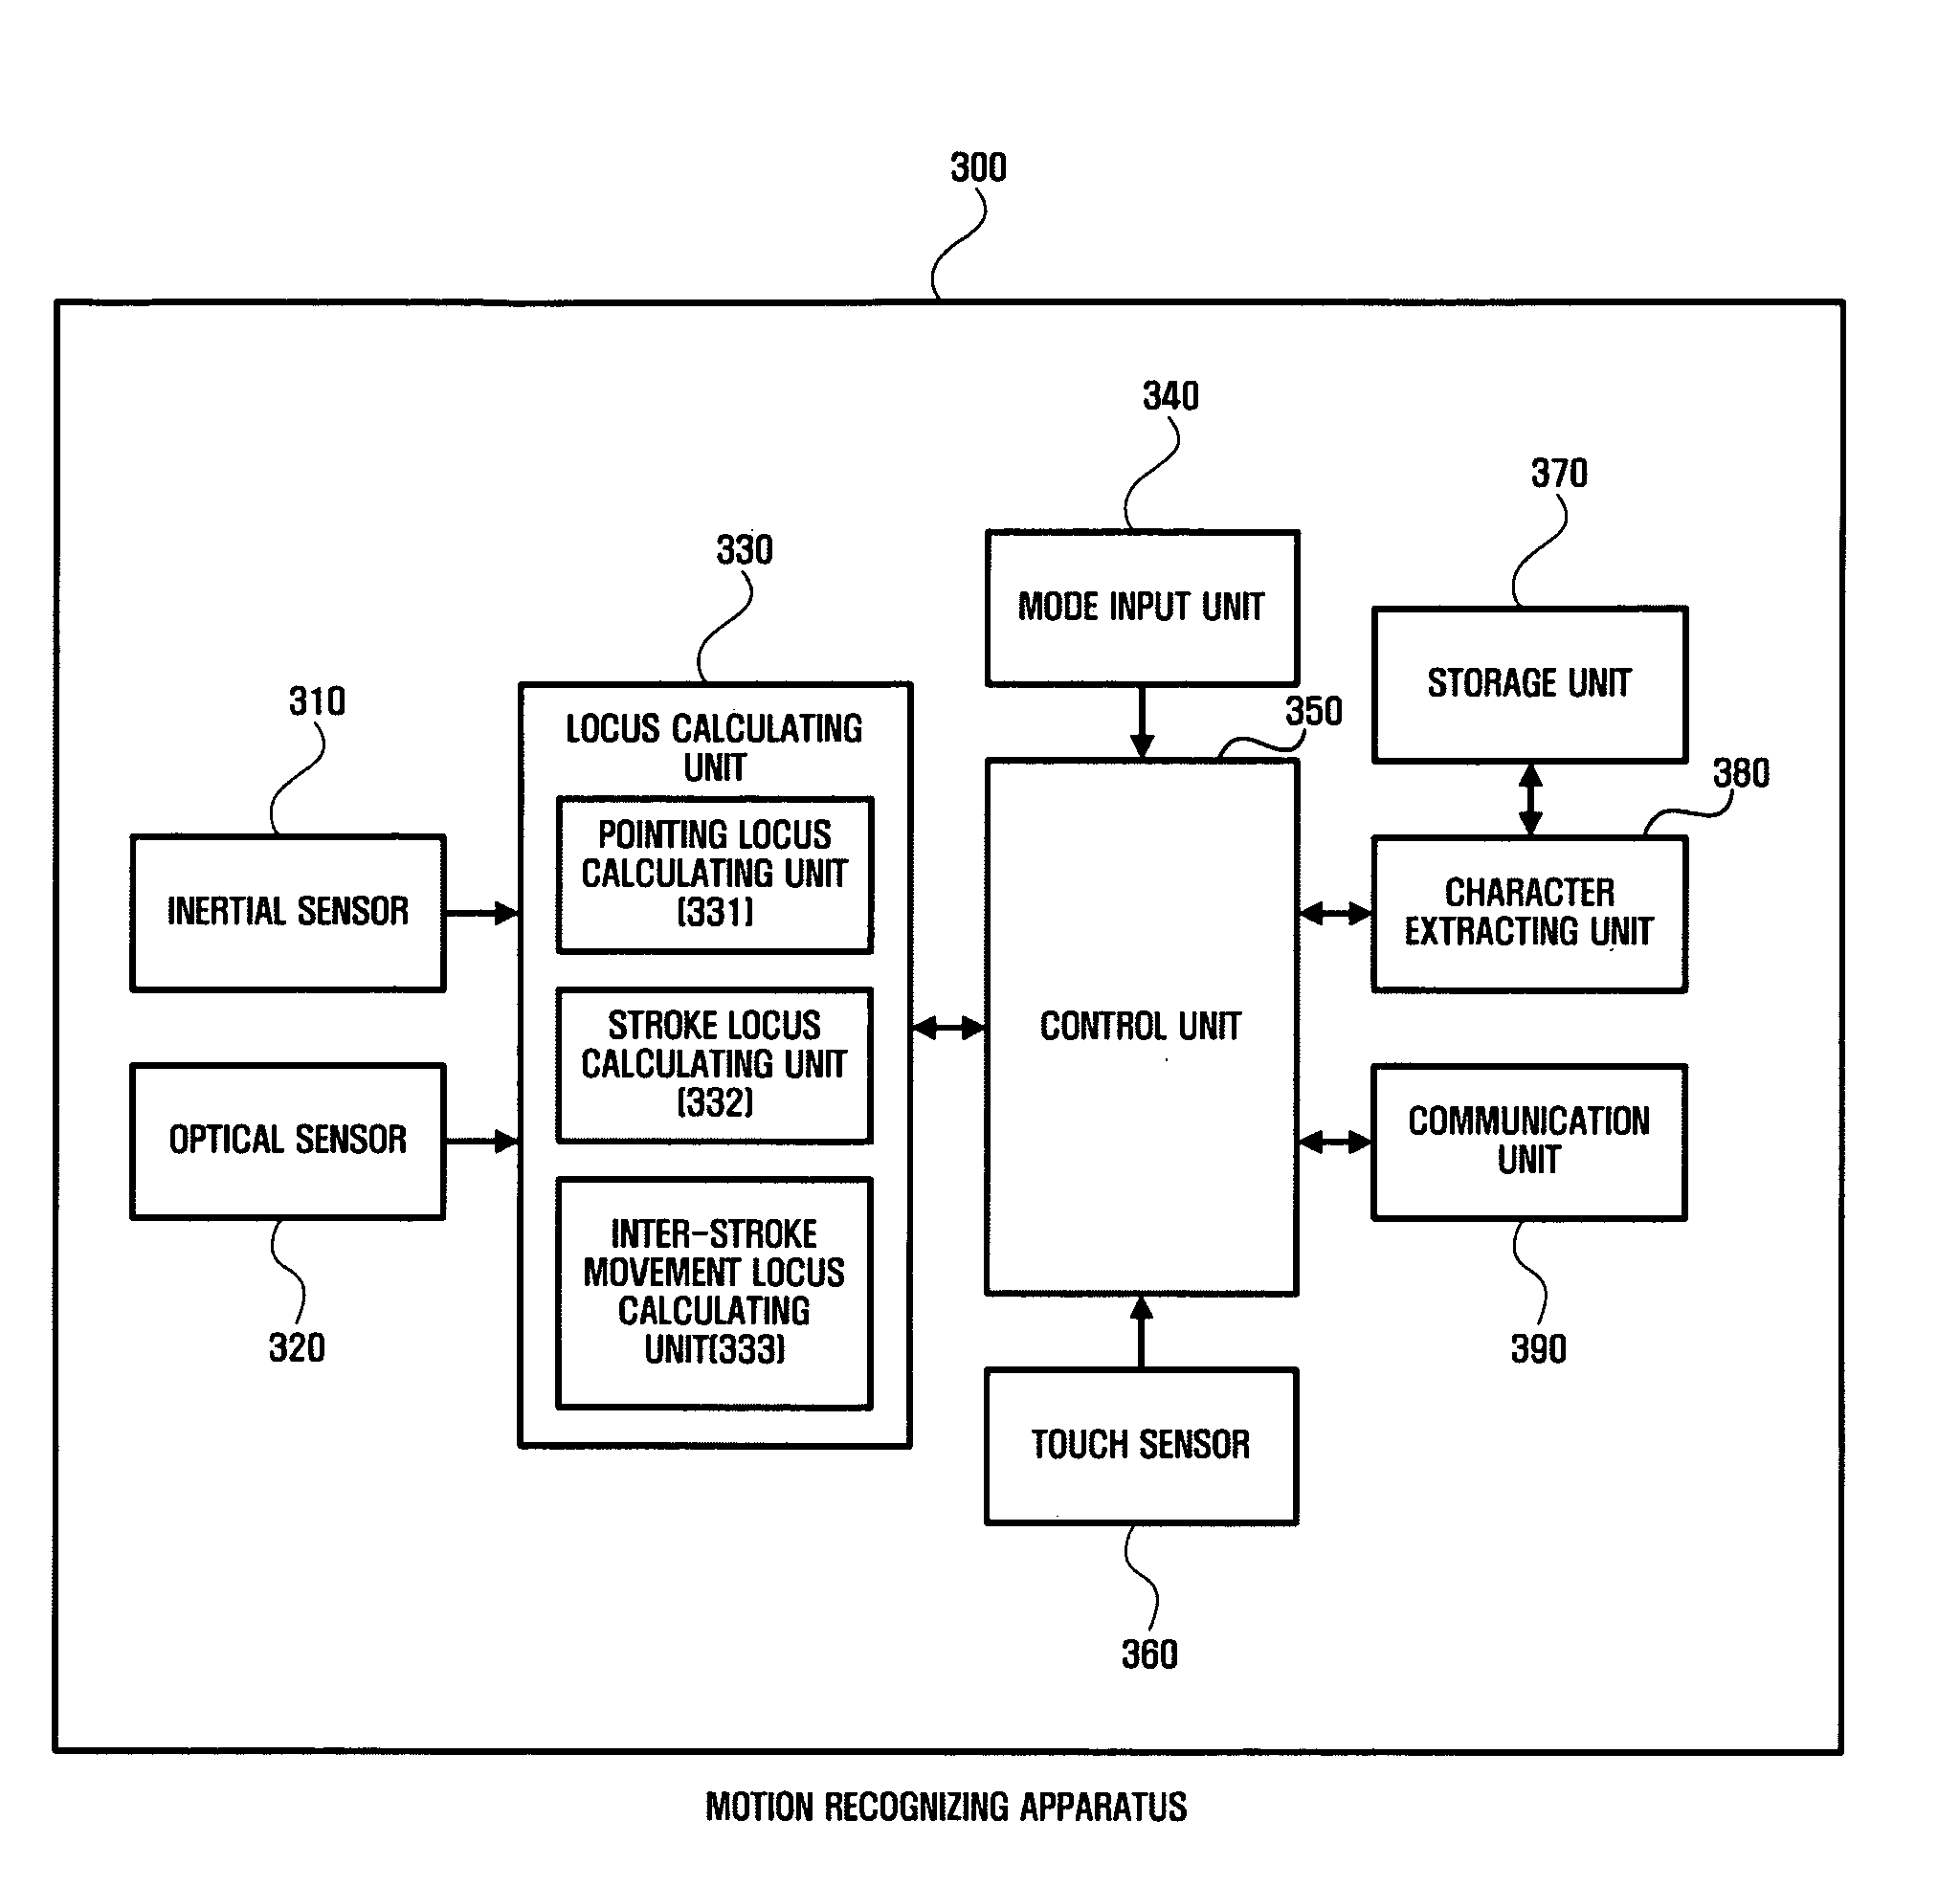 Apparatus and method for recognizing motion